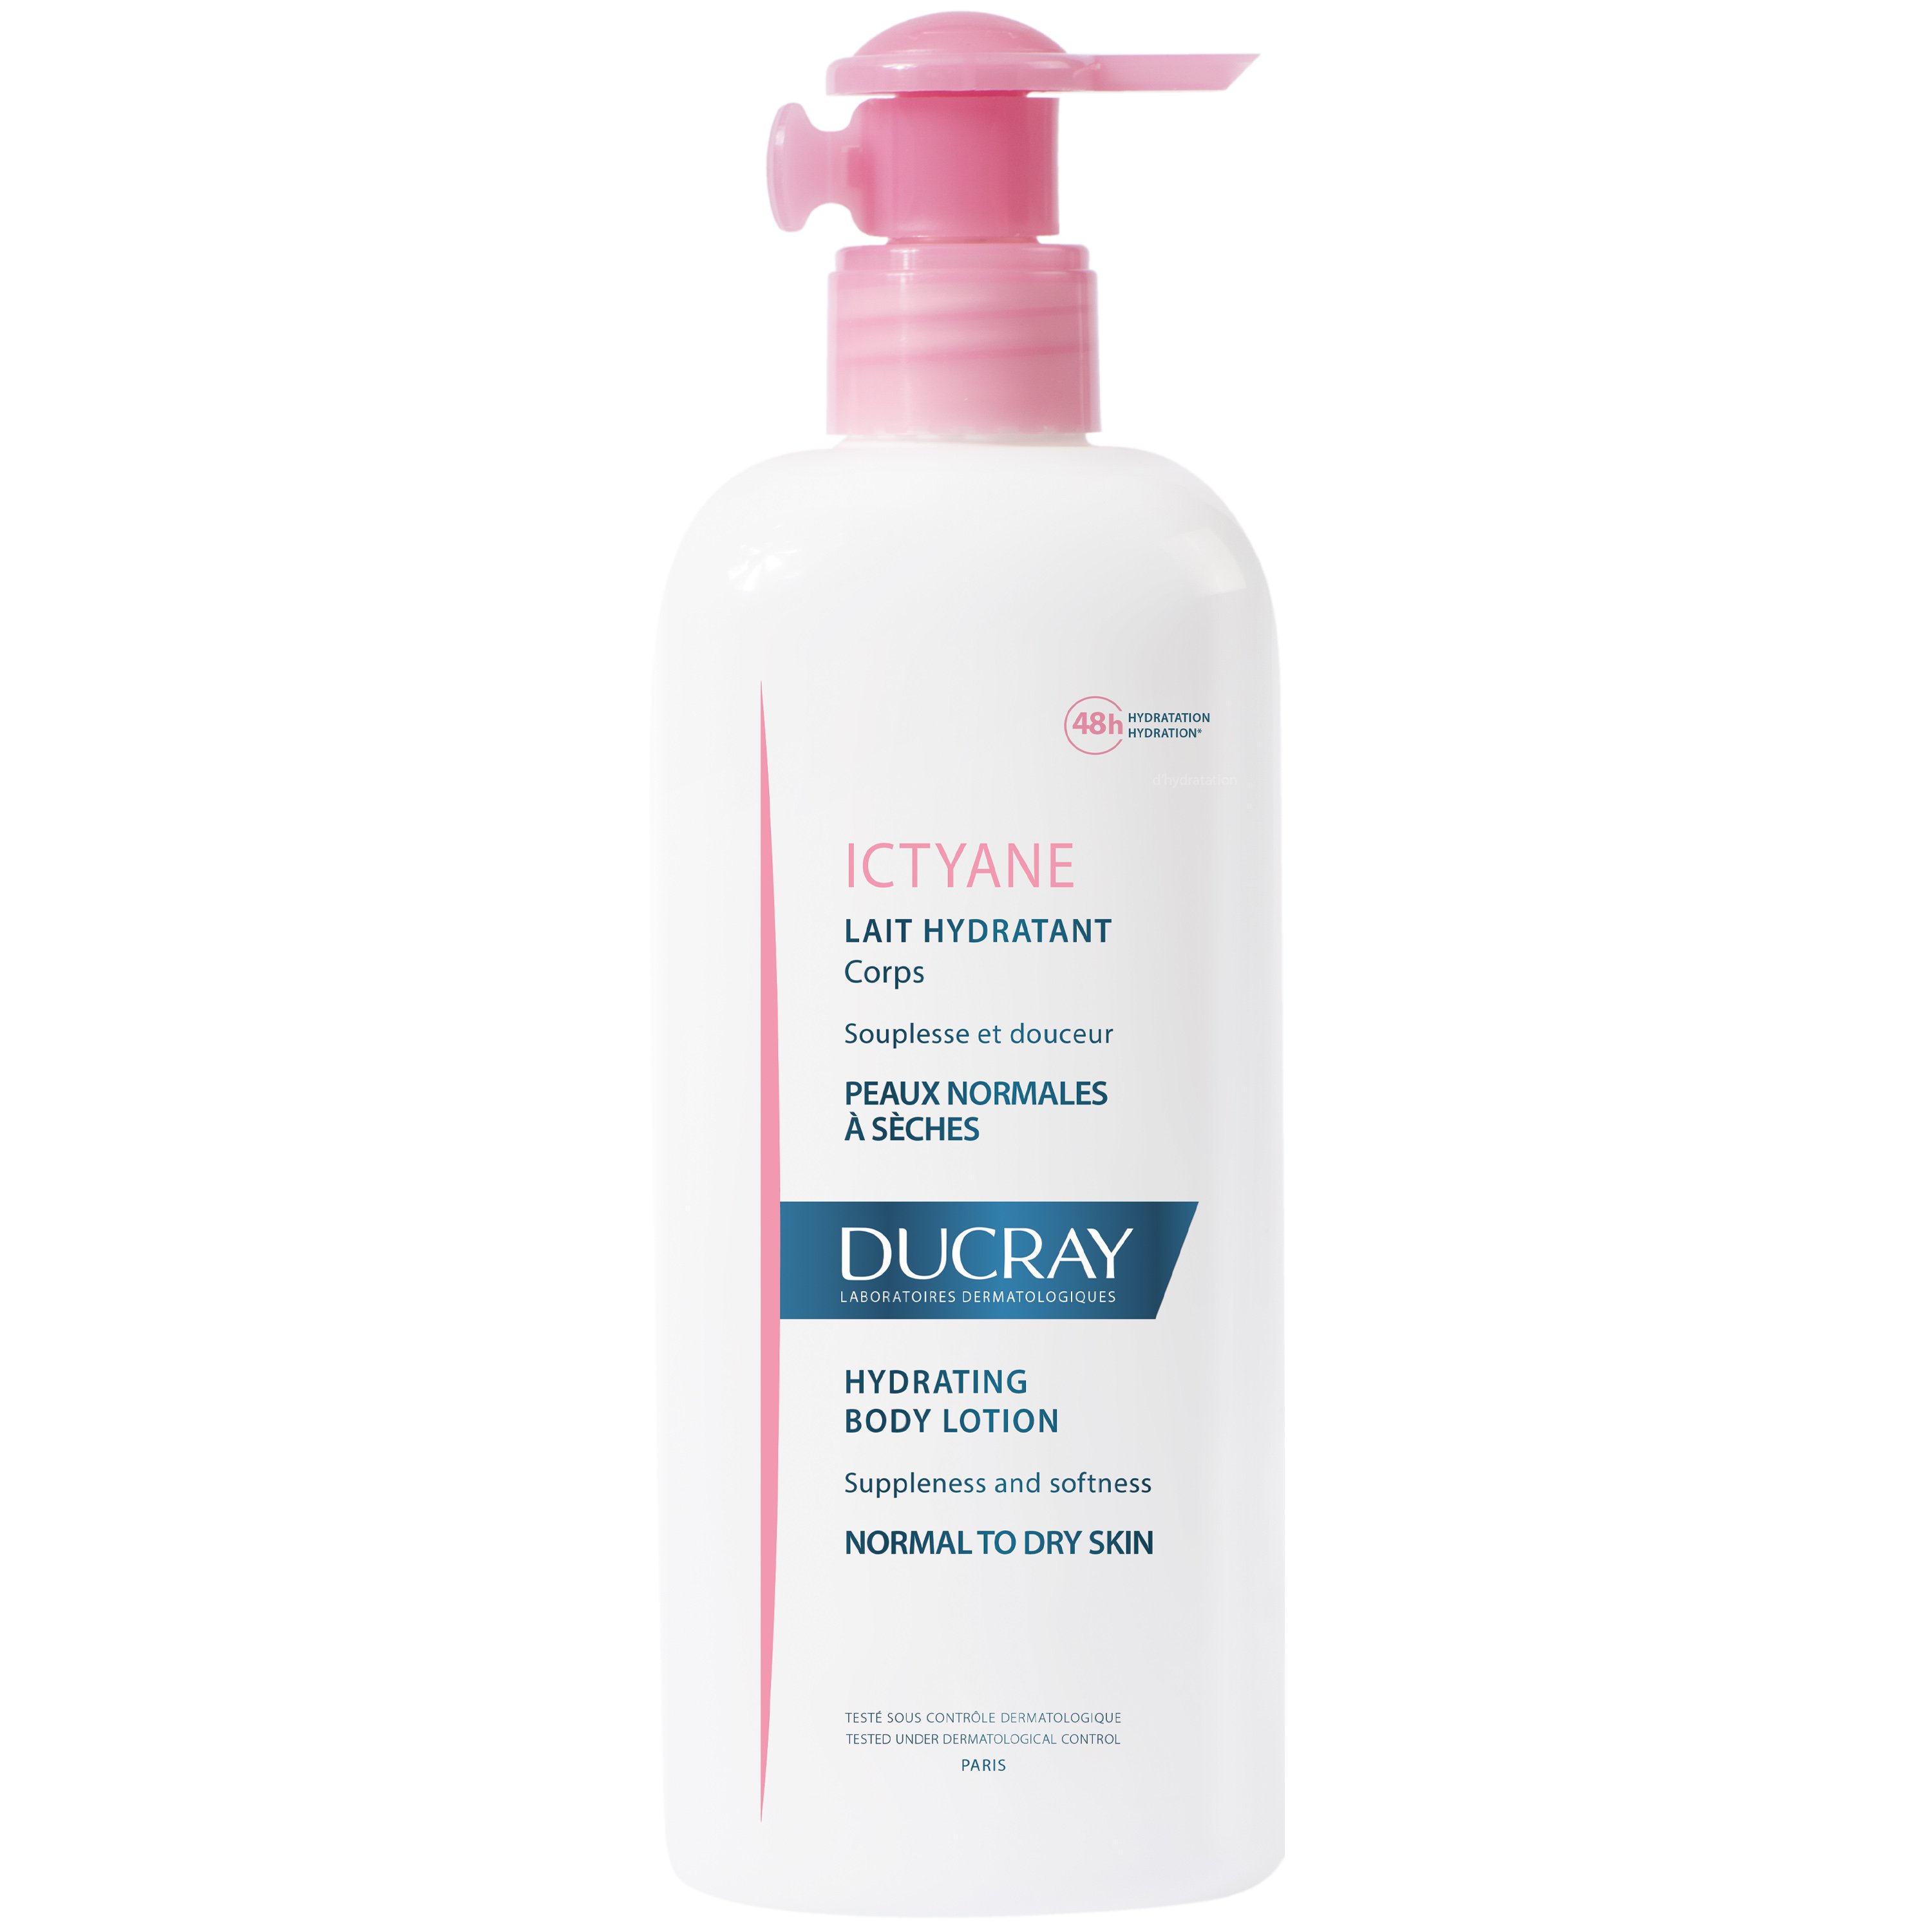 Ducray Ictyane Lait Hydratant Corps Normal to Dry Skin Ενυδατικό Γαλάκτωμα Σώματος Κανονικό προς Ξηρό Δέρμα 400ml